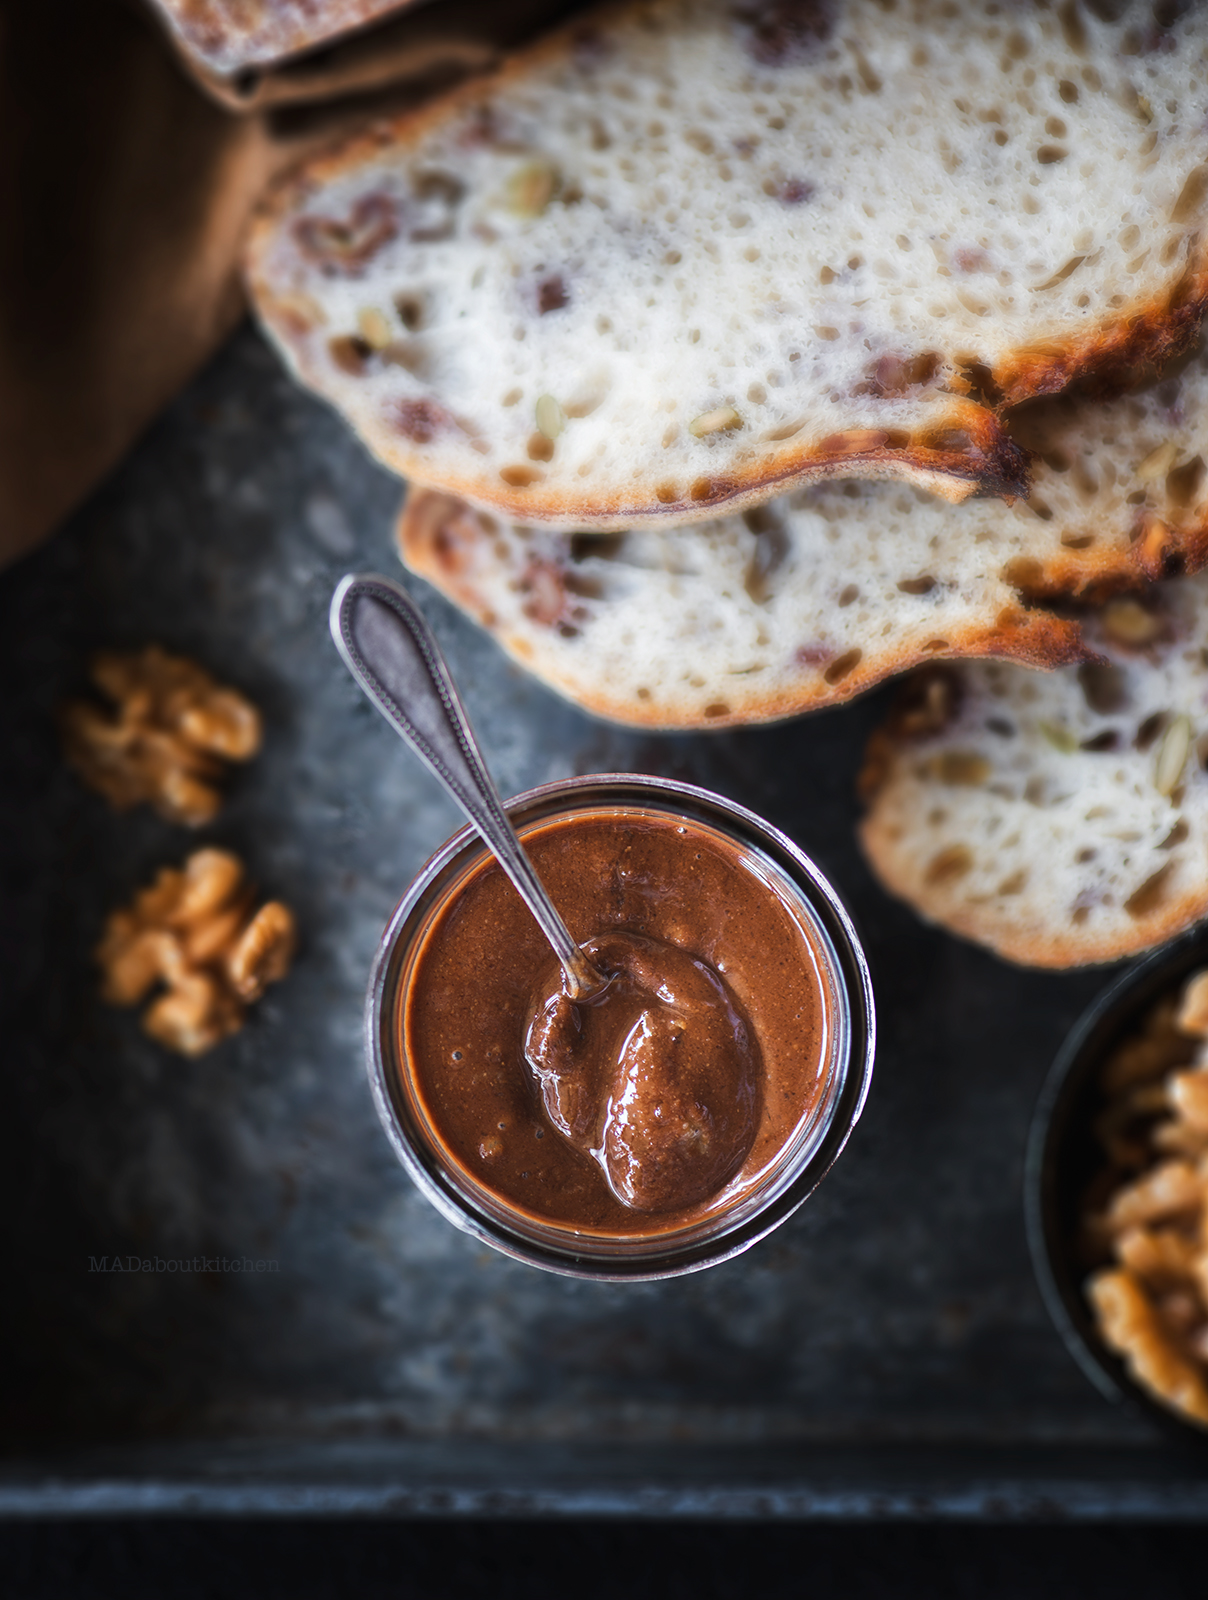 Walnut cocoa butter, is a grainy, chocolaty, homemade nut butter that is super healthy and super tasty and super easy to make. 